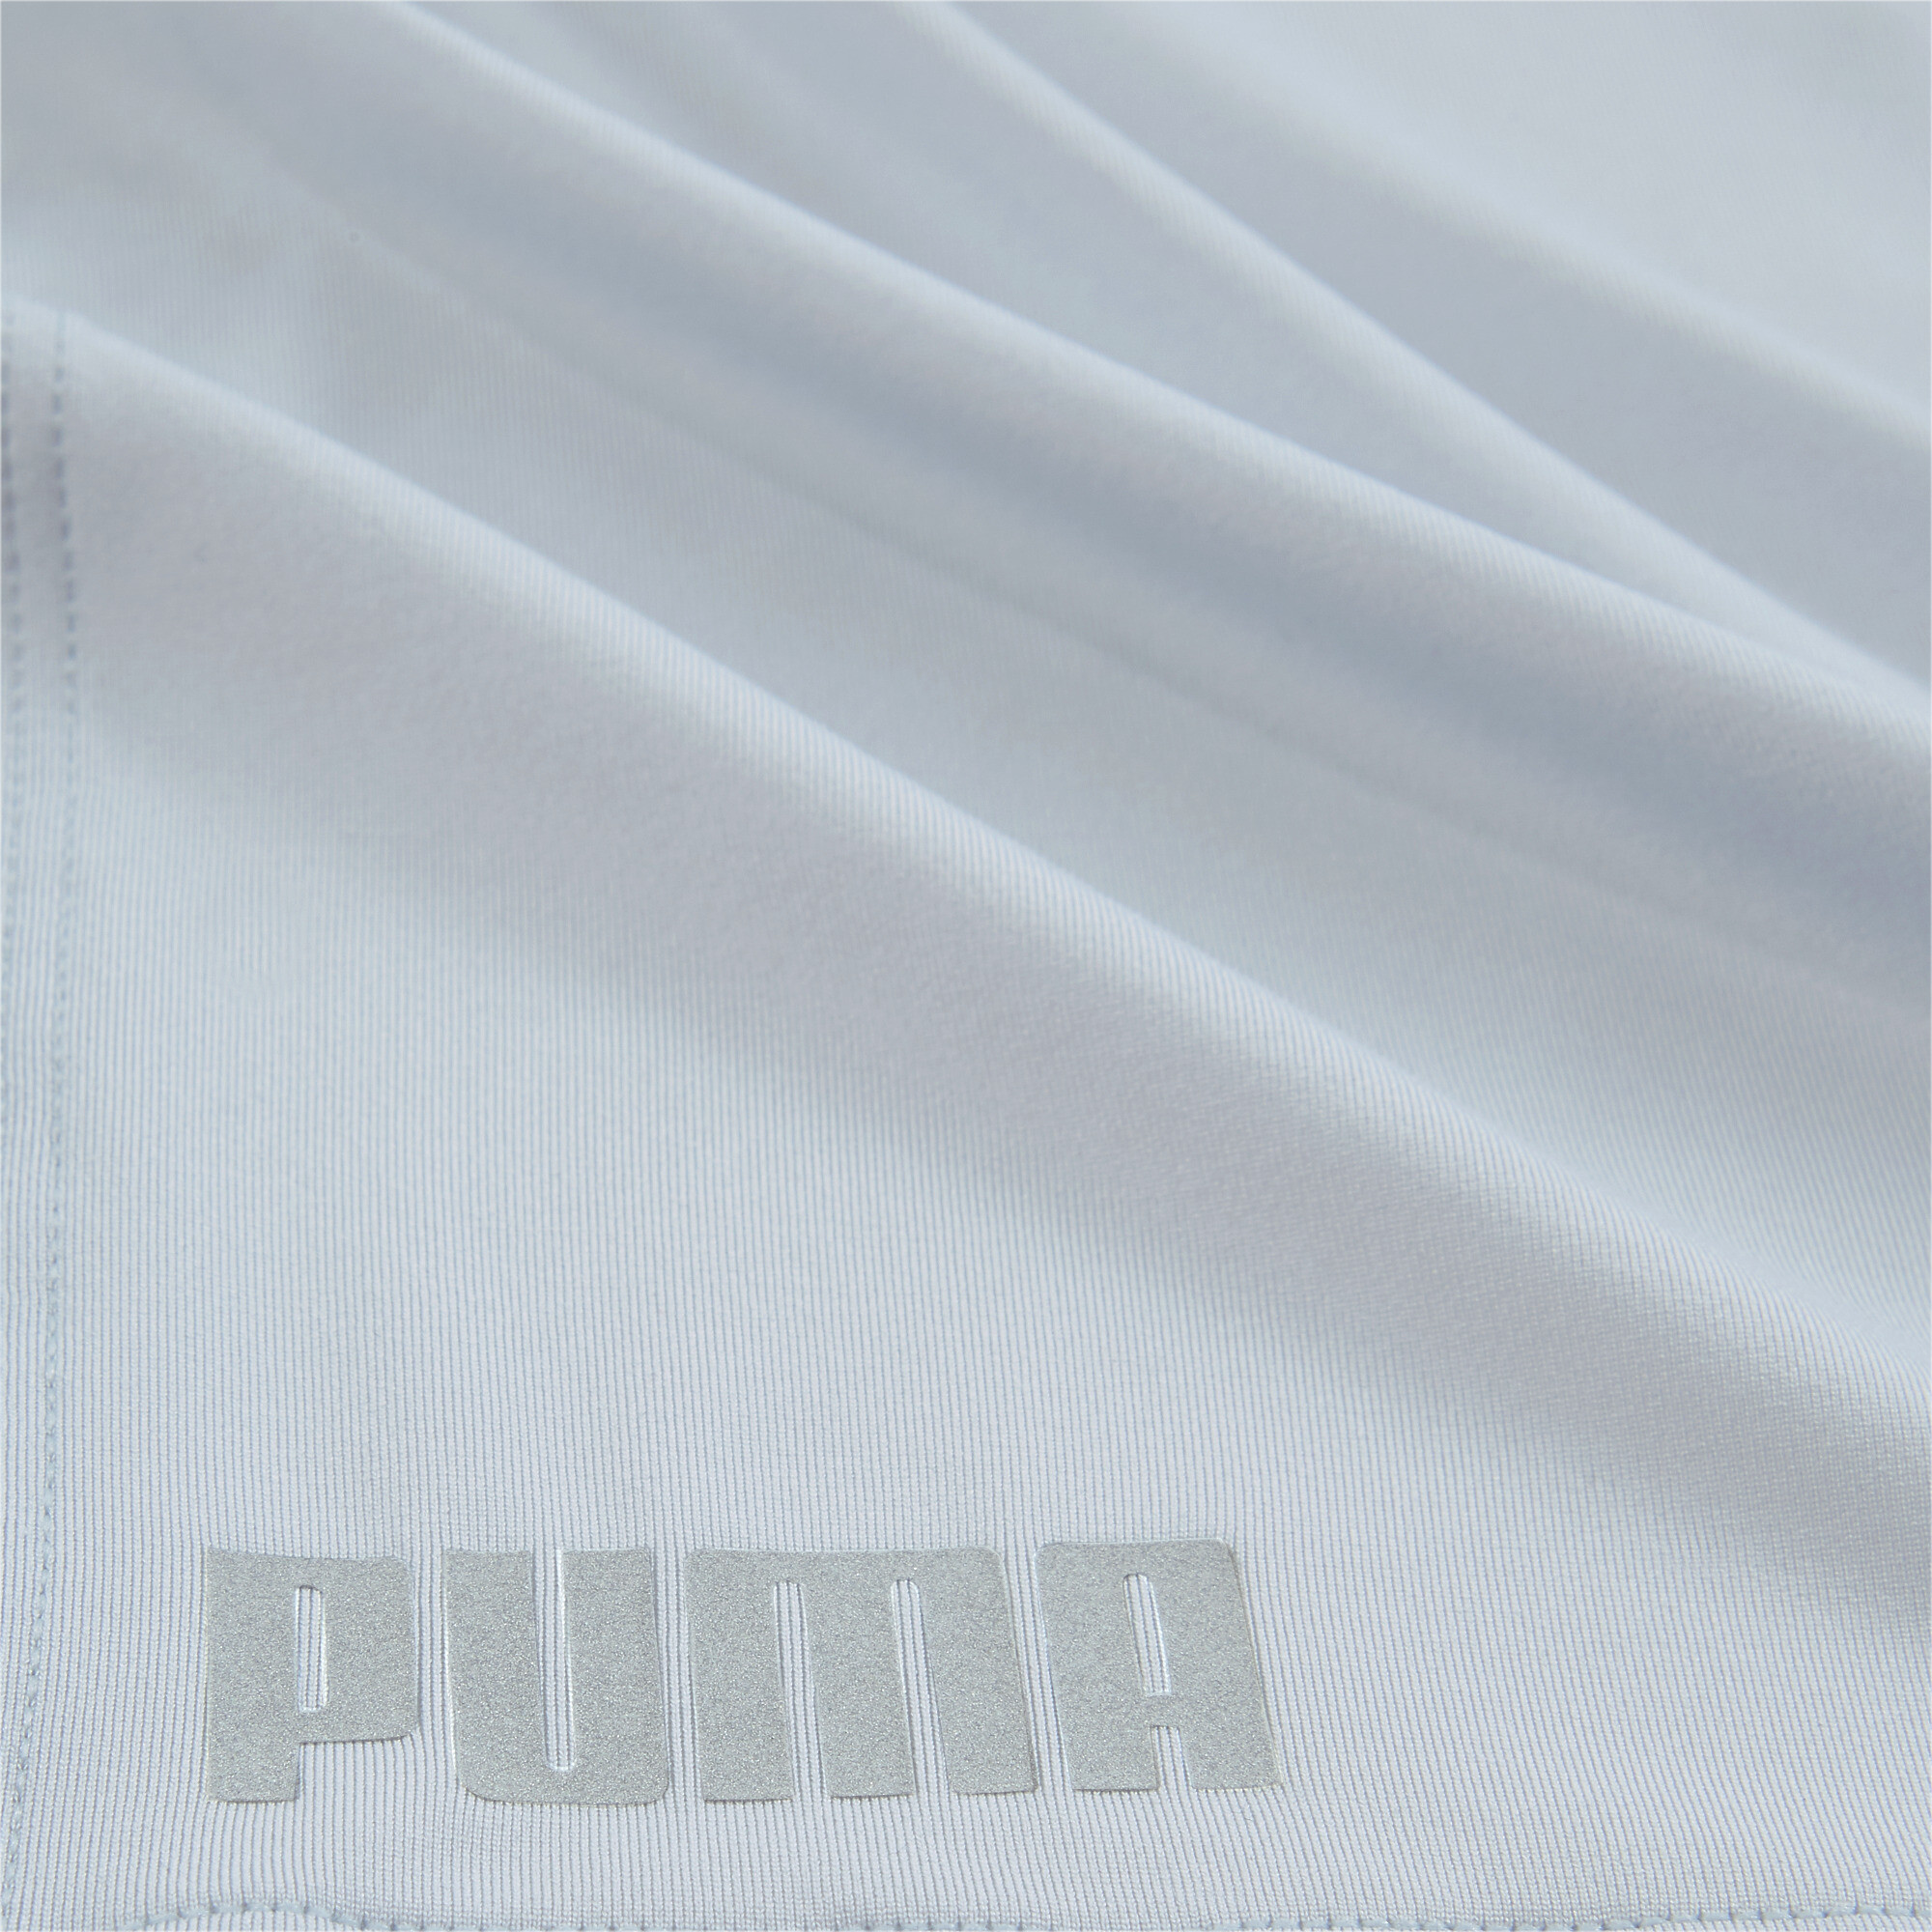 Women's PUMA Running Hijab Scarf In Gray, Size Adult